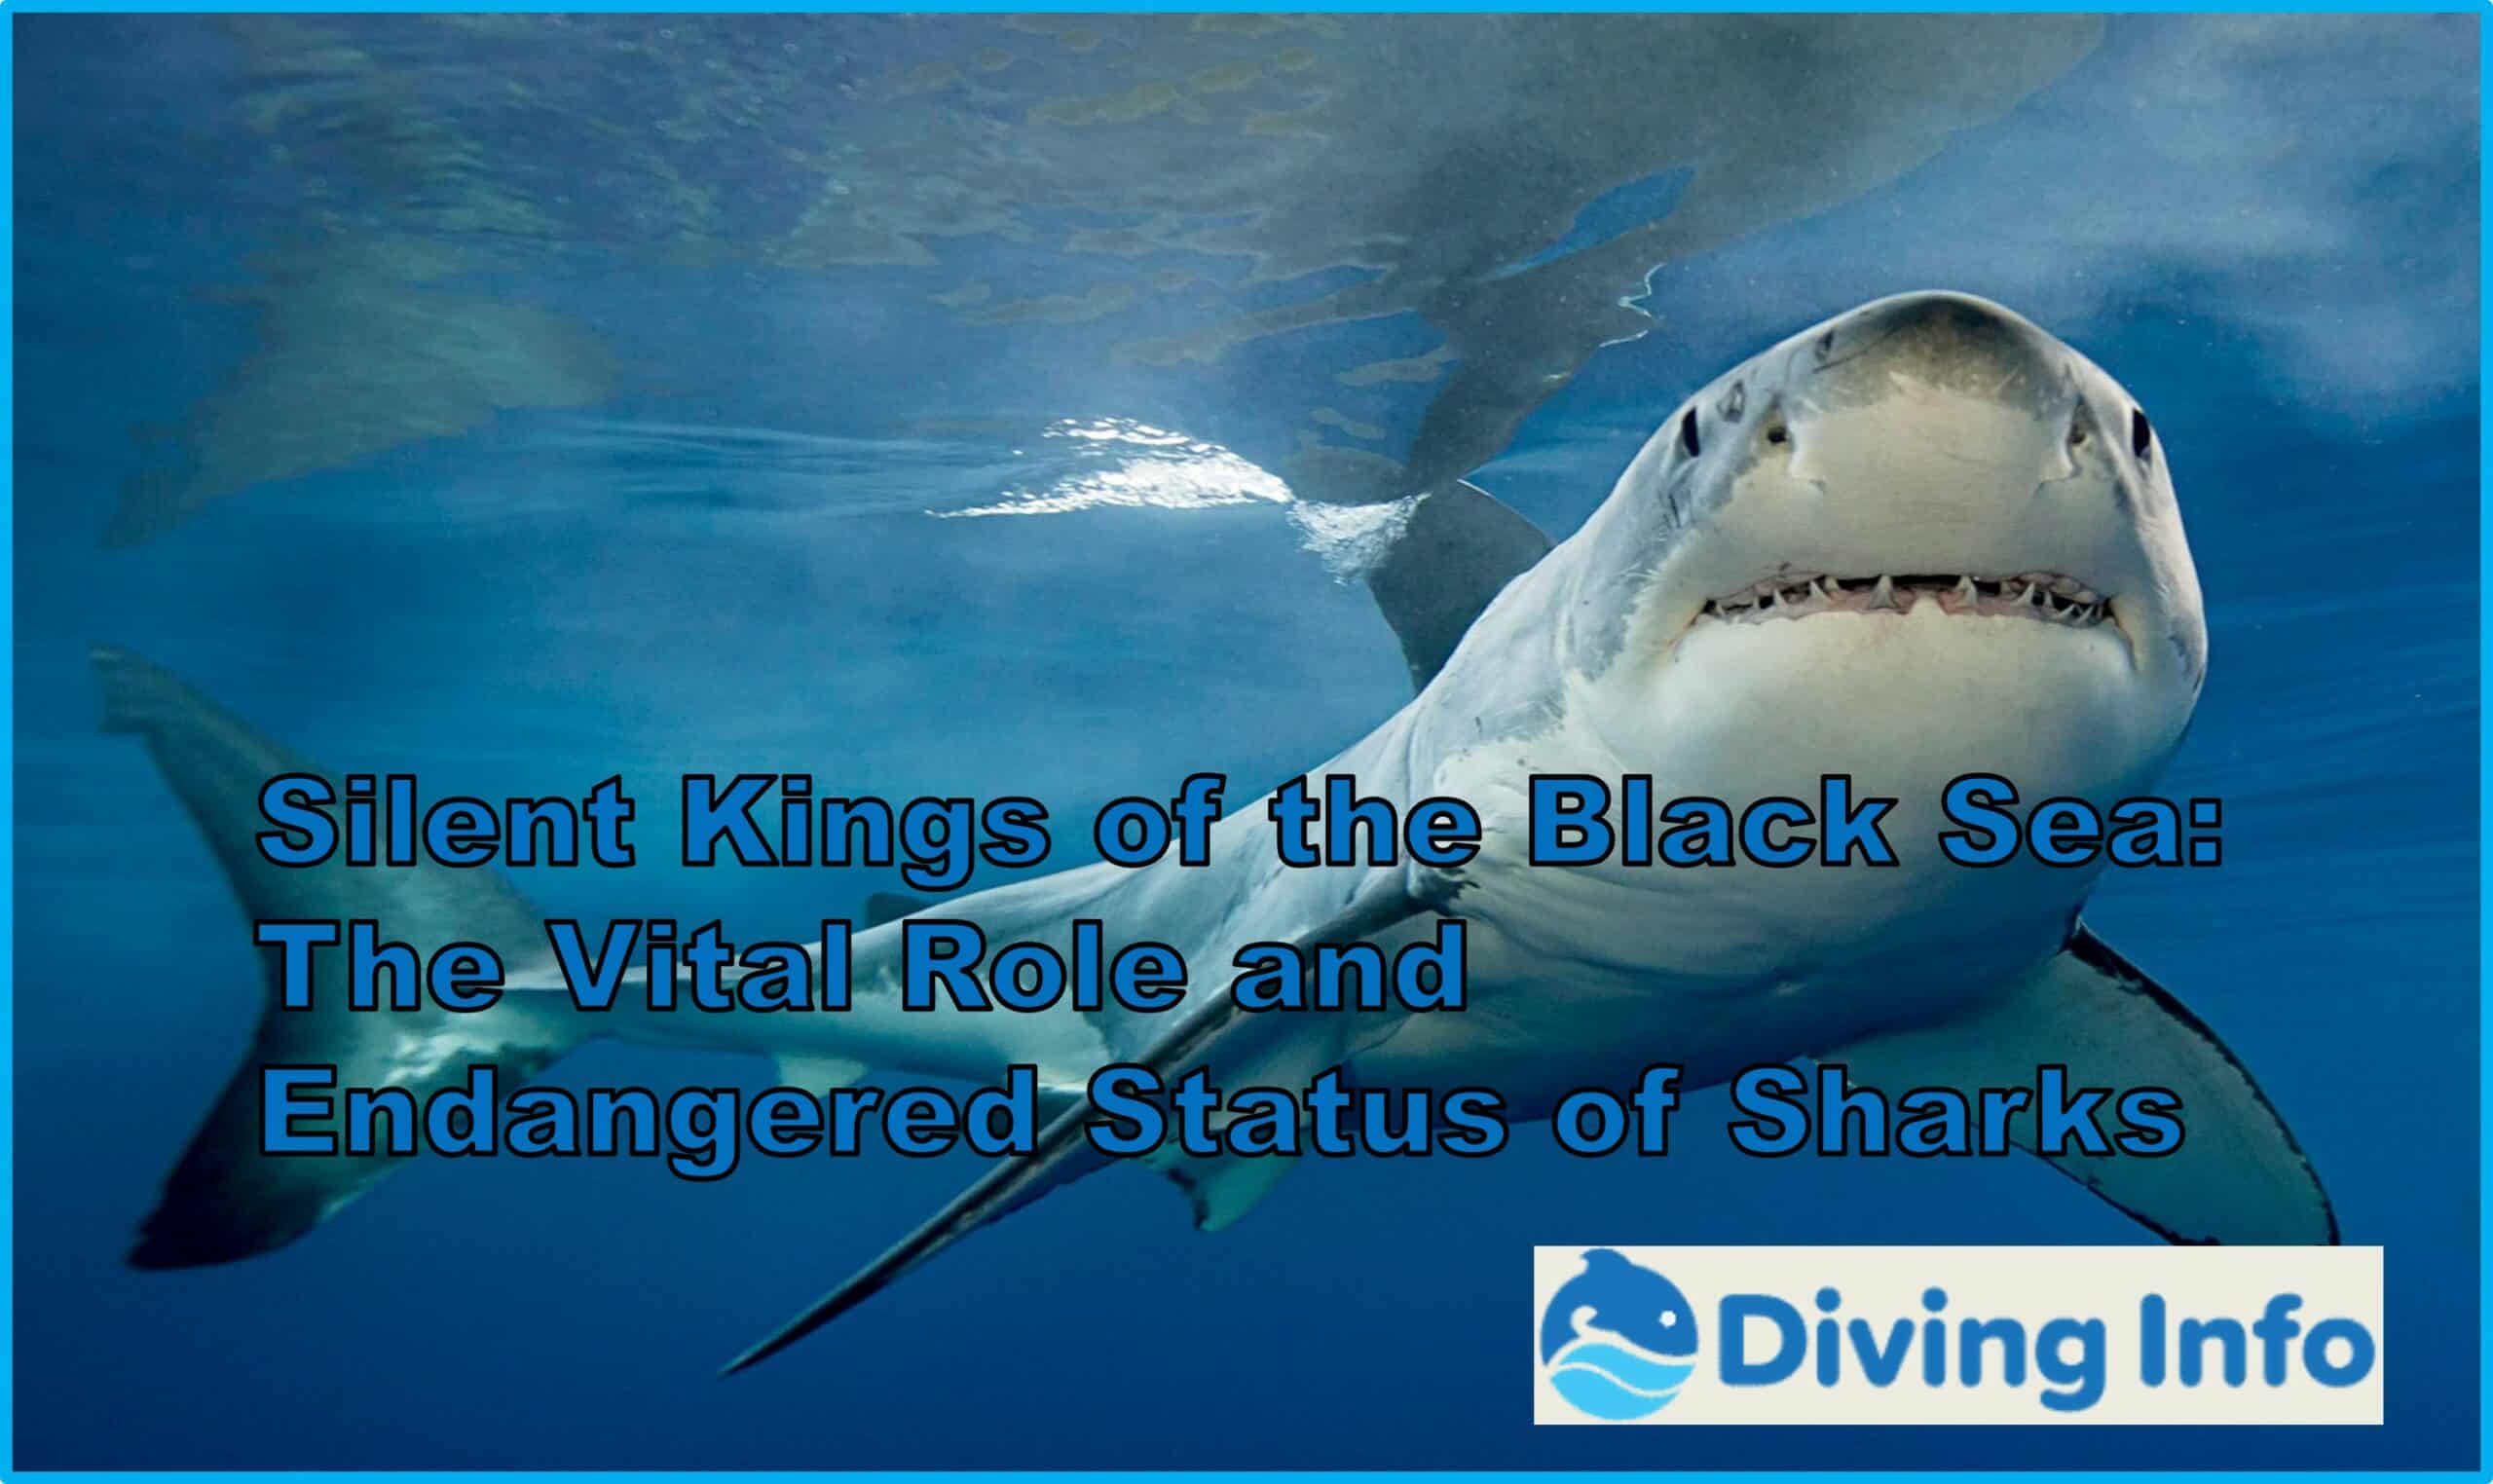 Silent Kings of the Black Sea: The Vital Role and Endangered Status of Sharks